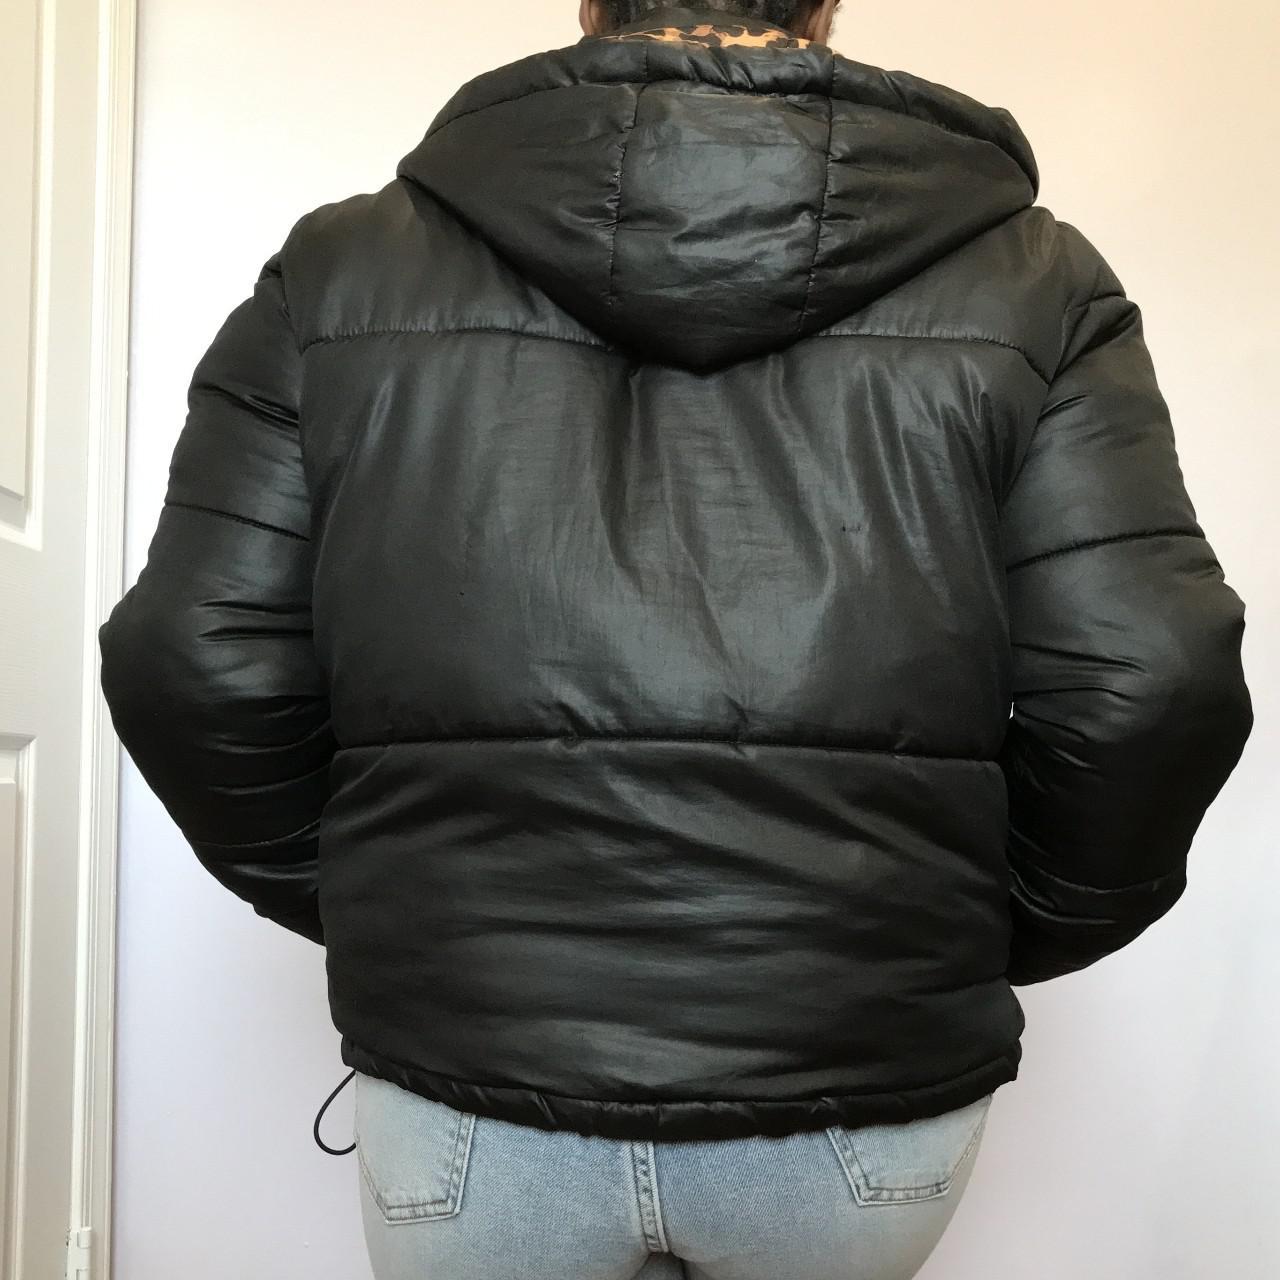 Urban Outfitters Women's Jacket (2)